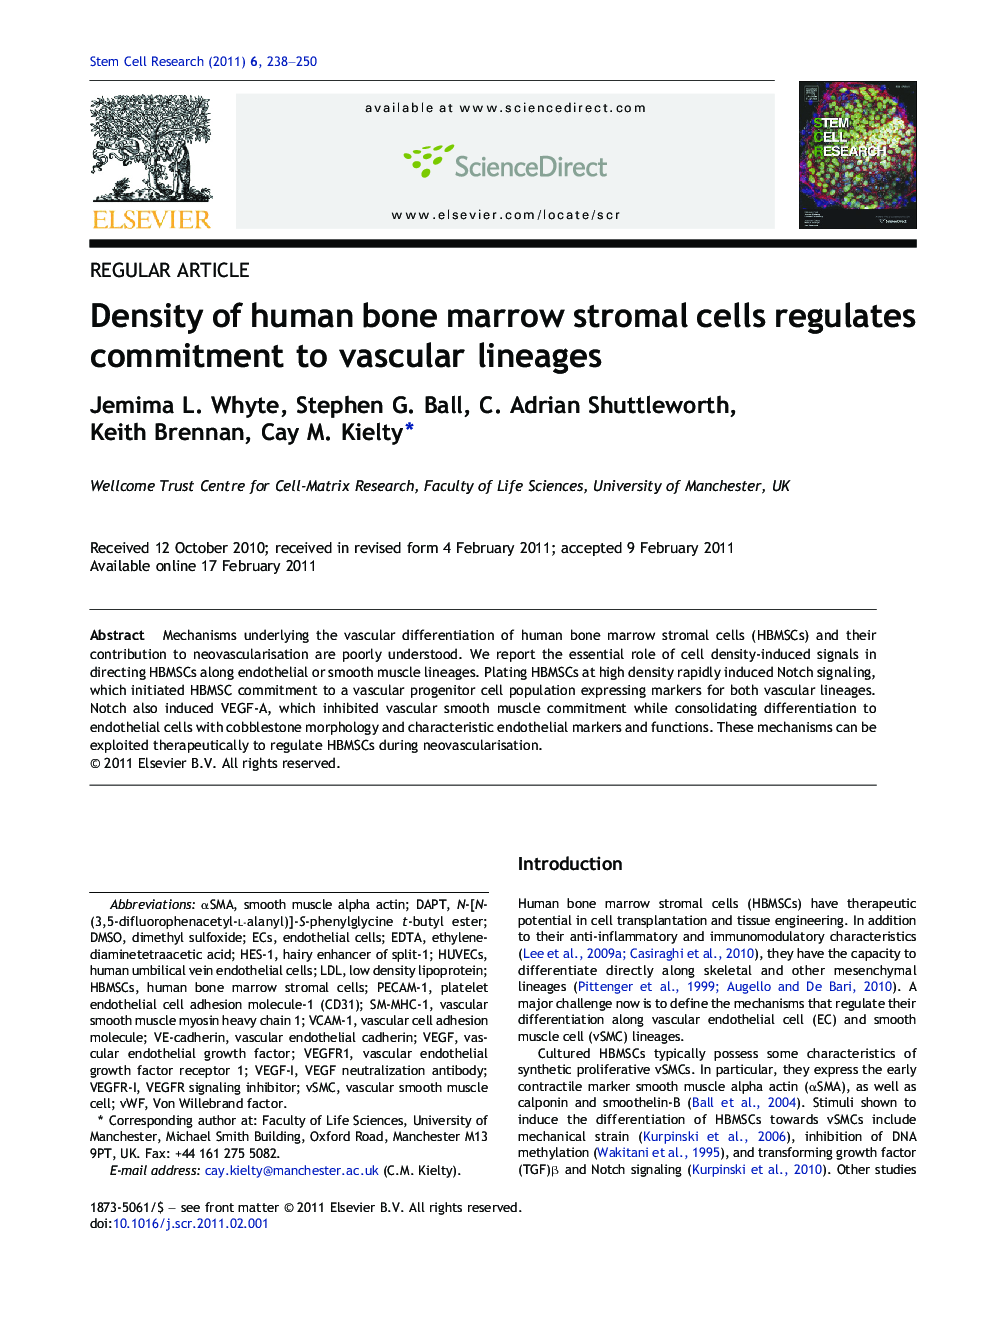 Density of human bone marrow stromal cells regulates commitment to vascular lineages